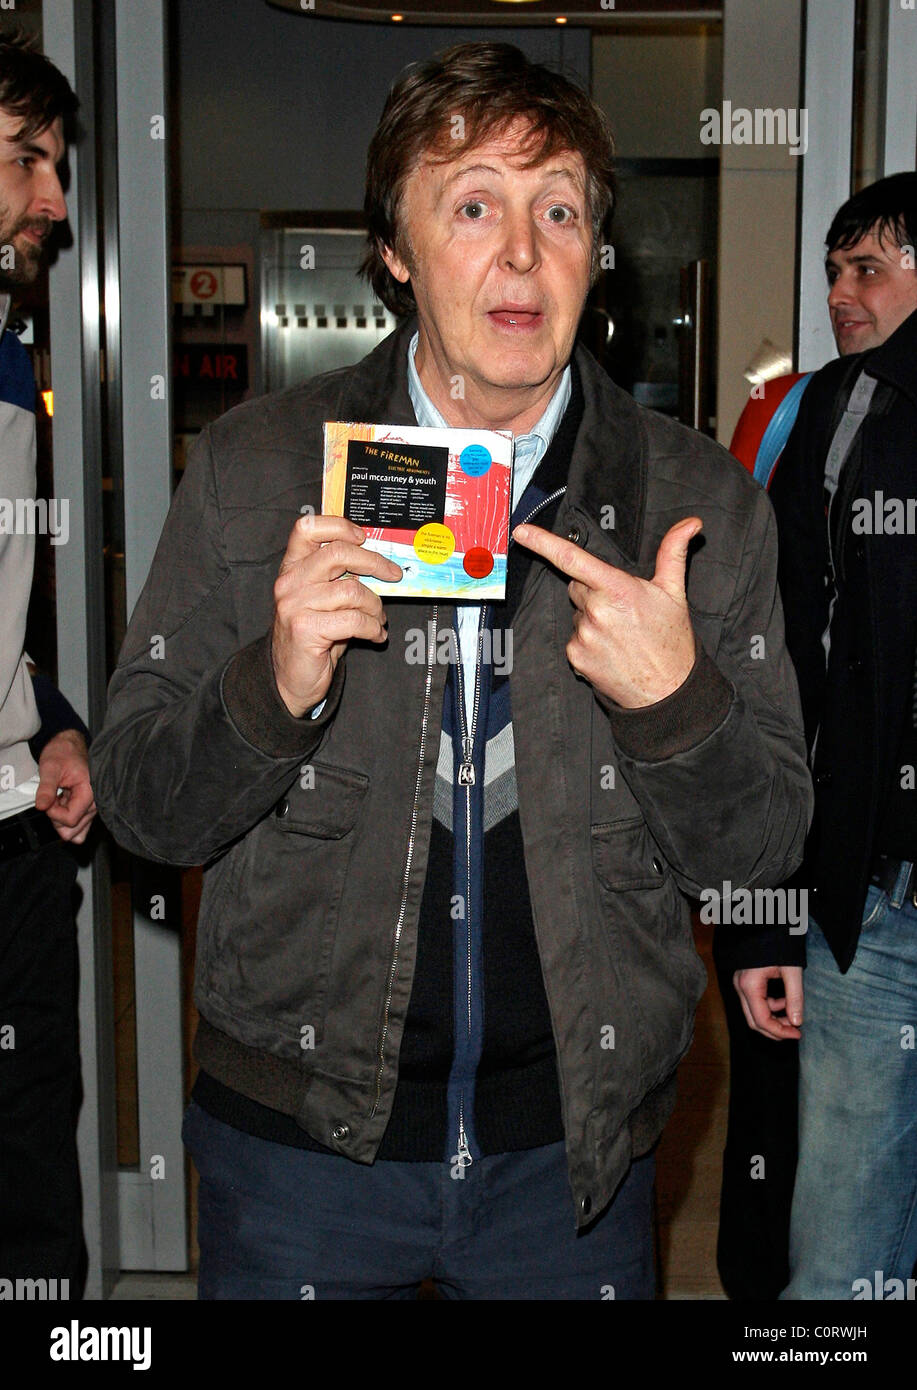 Paul McCartney holds up the new album from his band 'The Fireman' as he ...